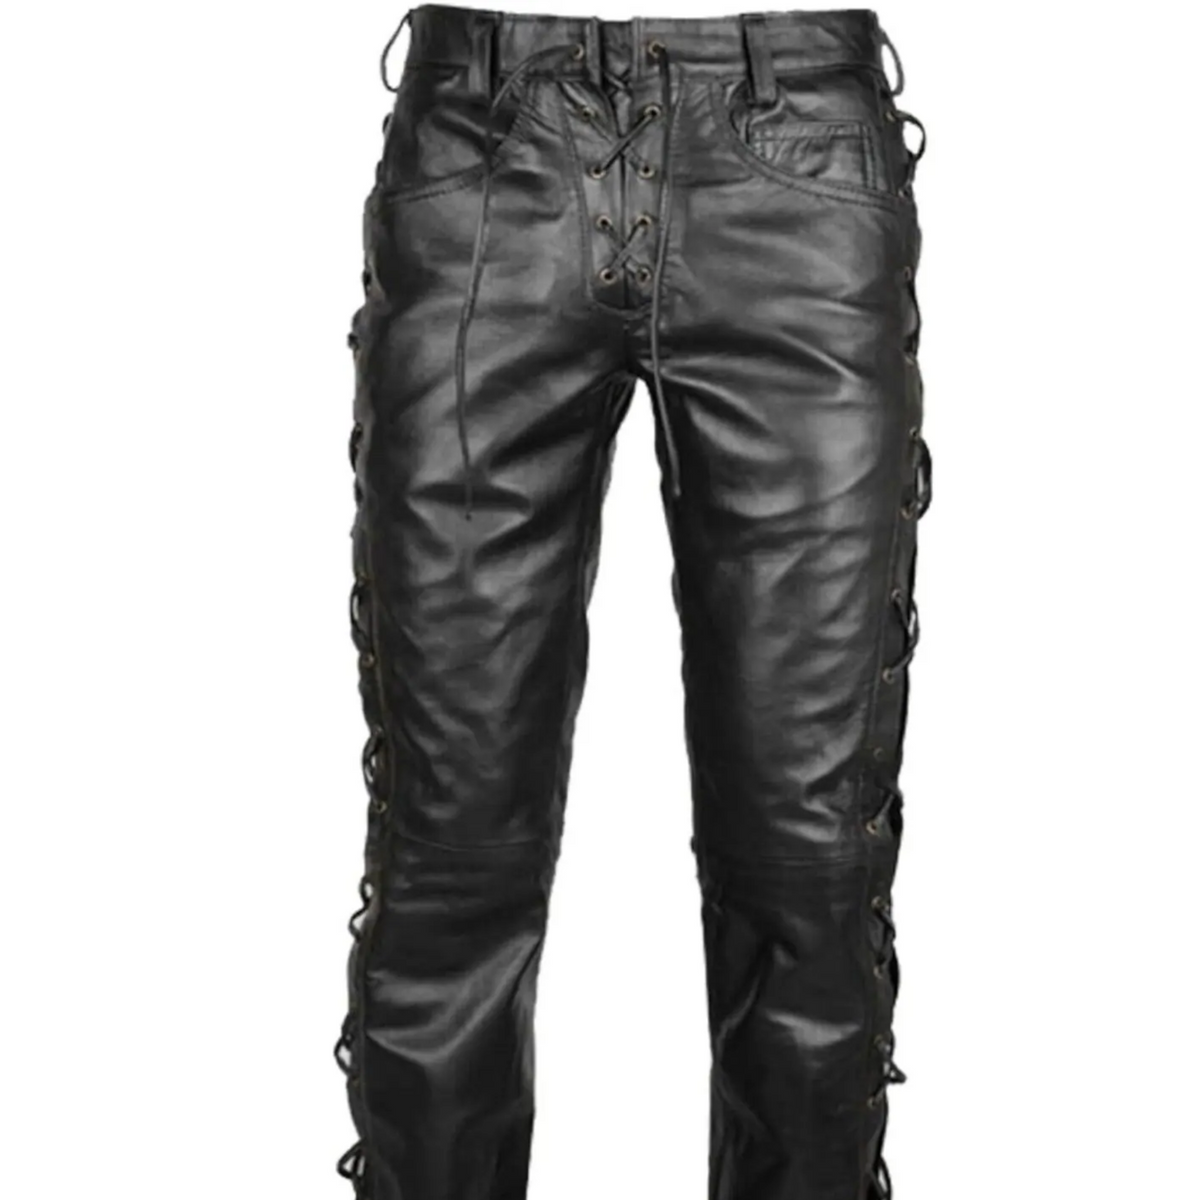 Leather pants are never out of fashion  Mens leather pants, Mens outfits, Leather  pants